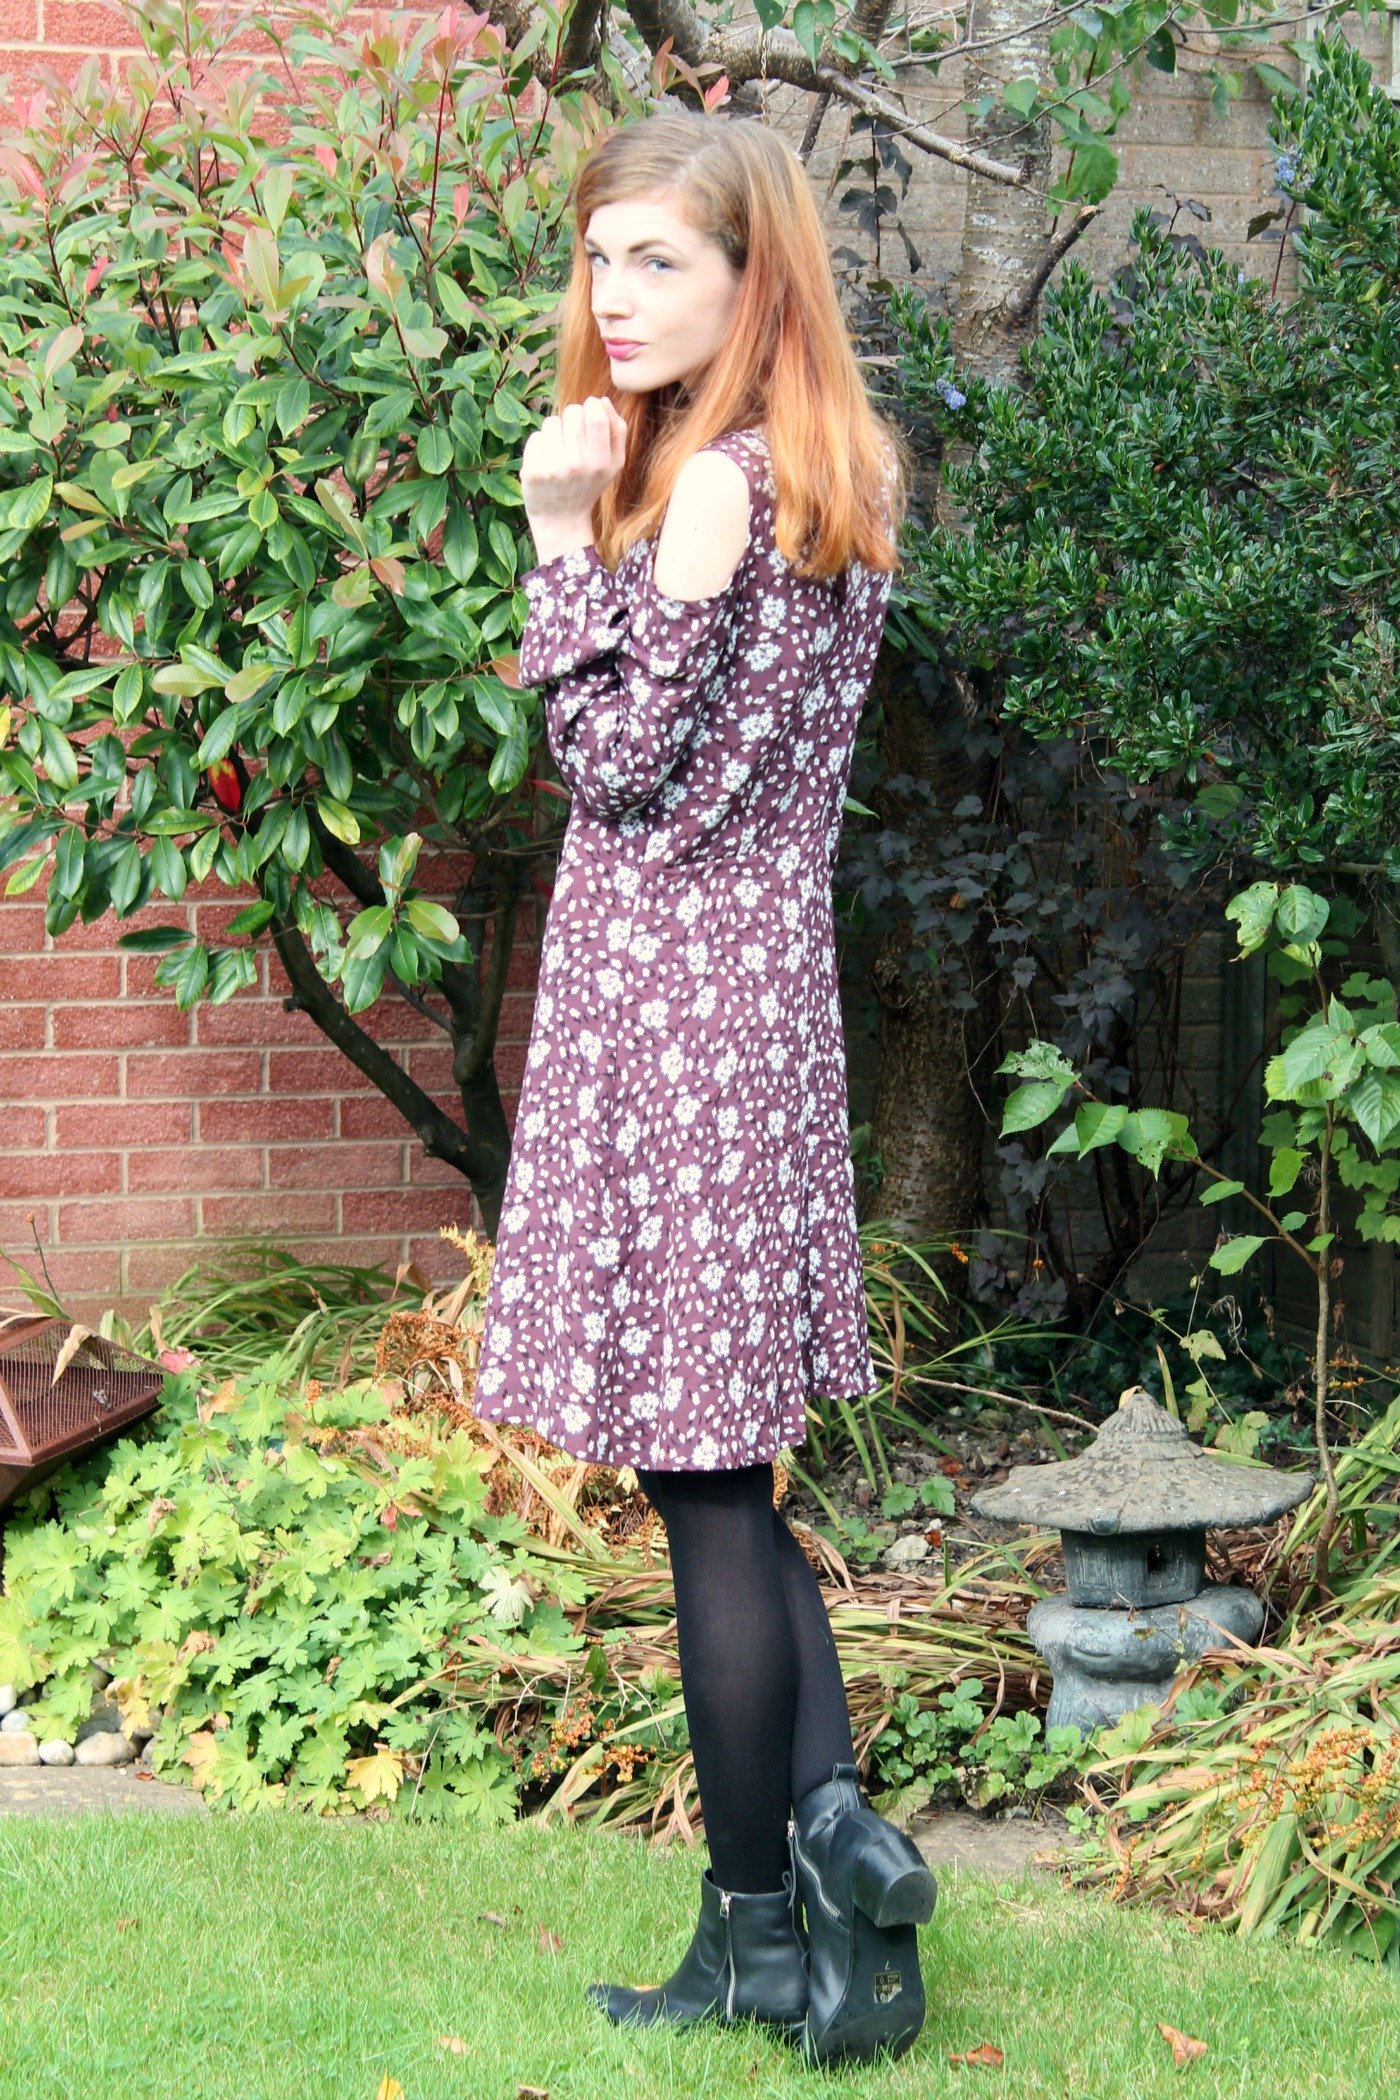 Floral Dress And Ankle Boots A Daisy Chain Dream